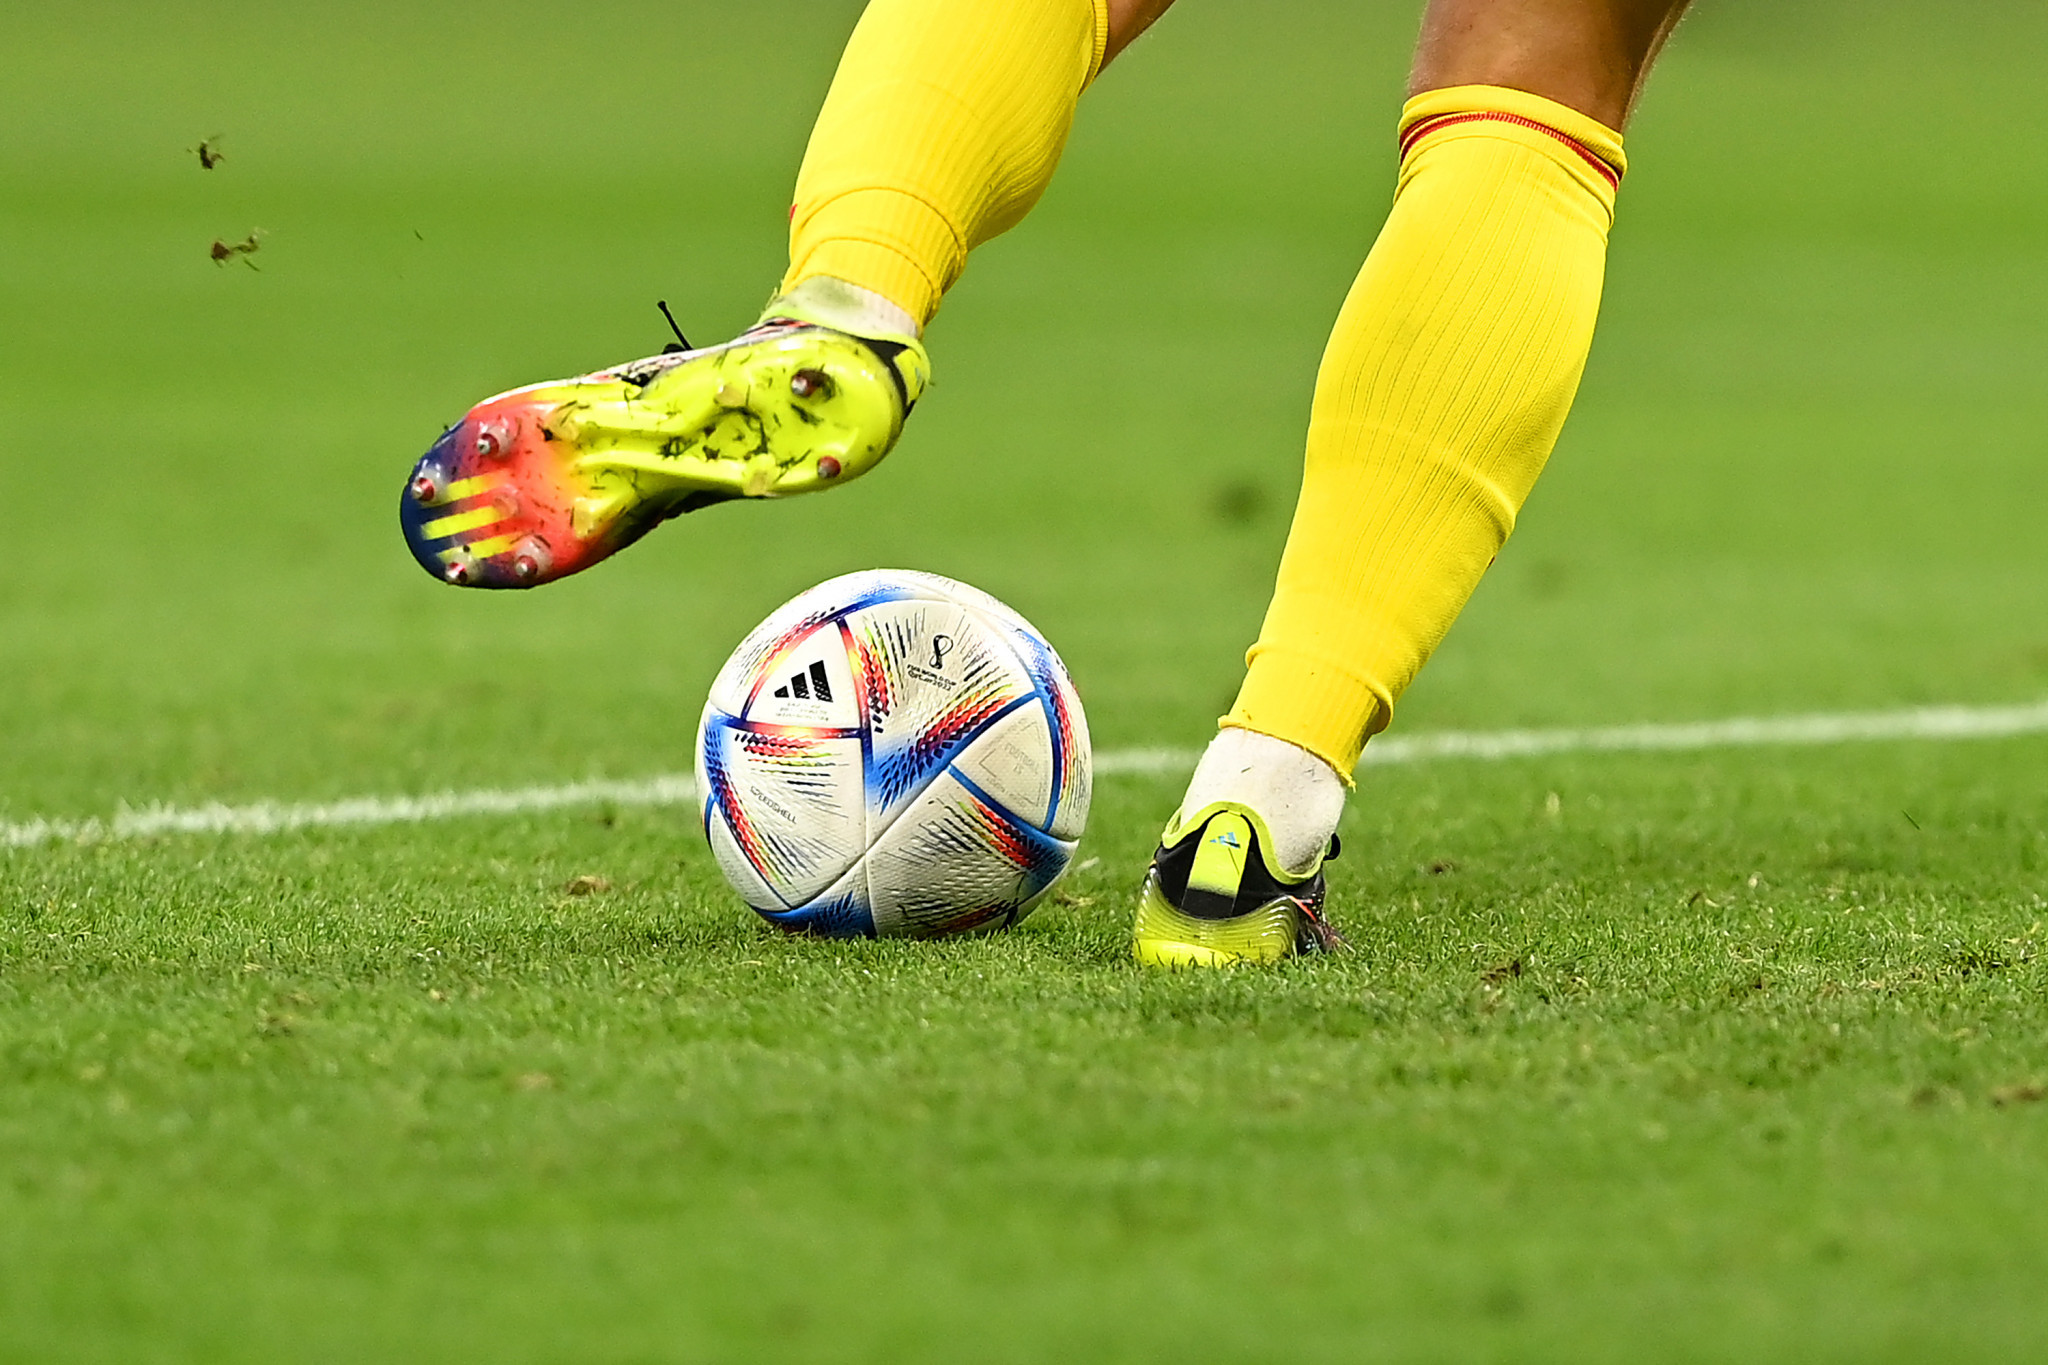 The Al Rihla match ball has been used at all Qatar 2022 World Cup matches so far ©Getty Images